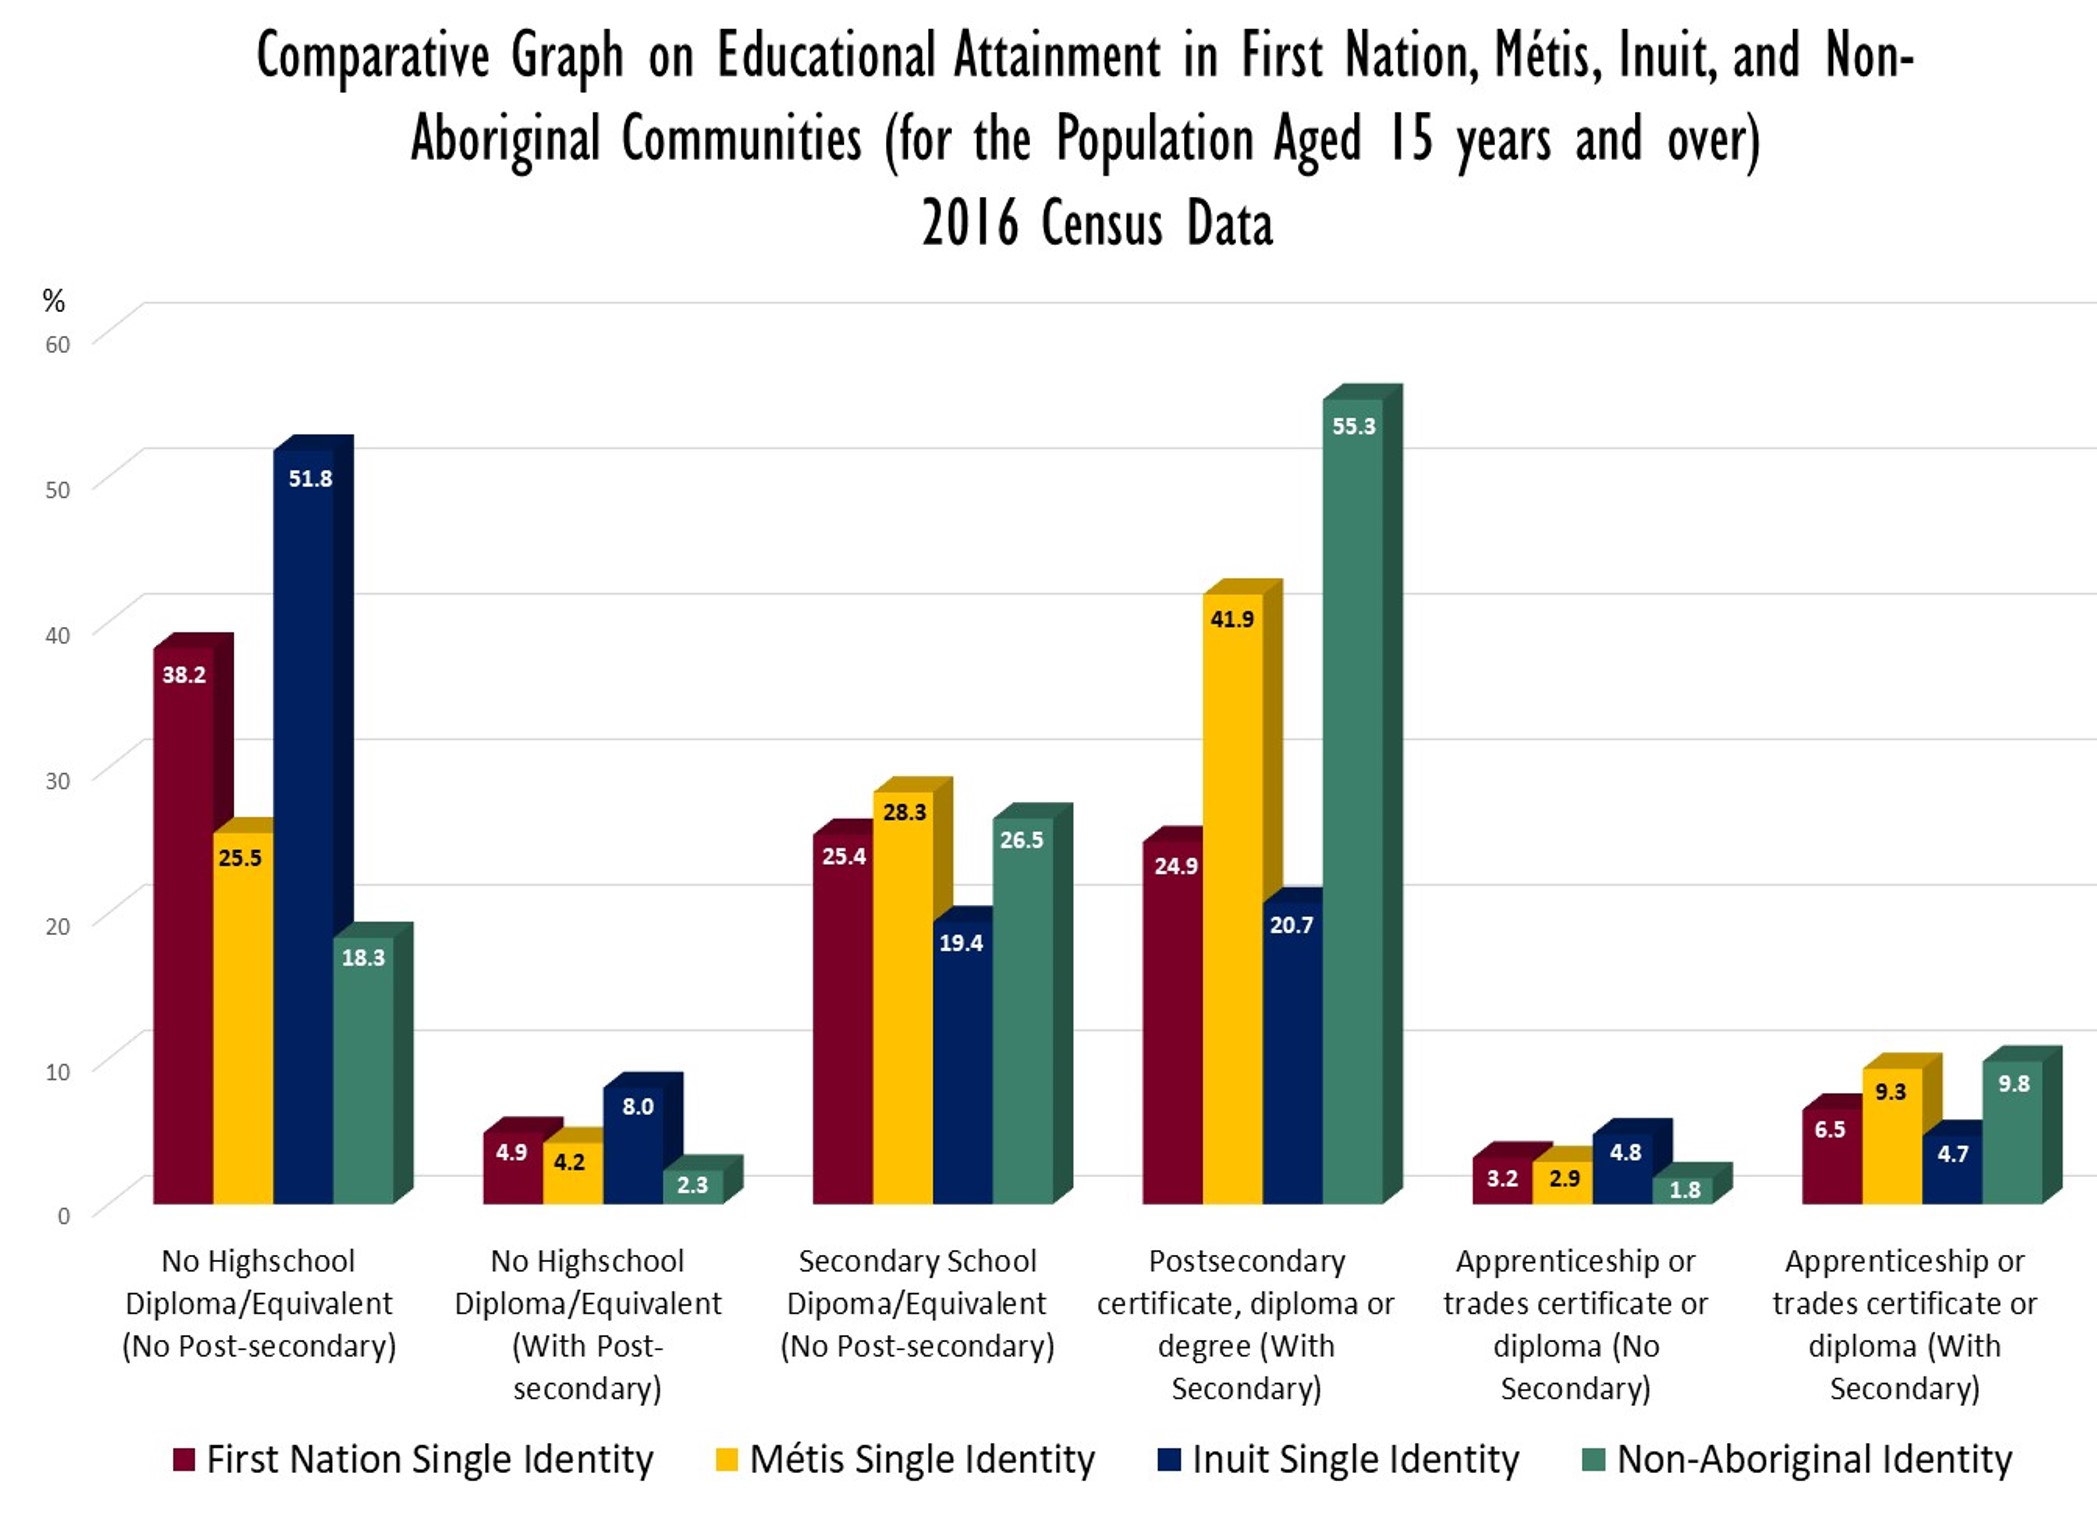 This bar chart for 2016 shows the respective percentages in order of First Nations, Metis, Inuit, and non-Aboriginal people identifying just one way For no high school diploma or equivalent and no post-seconday: 38.2, 25.5, 51.8, 18.3; for no high school diploma or equivalent but some post-secondary: 4.9, 4.2, 8.0, 2.3; for high school diploma or equivalent but no post-secondary: 25.4, 28.3, 19.4, 26.5; for high-school diploma or equivalent plus a postsecondary certificate, diploma or degree: 24.9, 41.9, 20.7, 55.3; for no high school but an apprenticeship or trades certificate or diploma: 3.2, 2.9, 4.8, 1.8; for high school and apprenticeship or trades certificate or diploma: 6.5, 9.3, 4.7, 9.8.